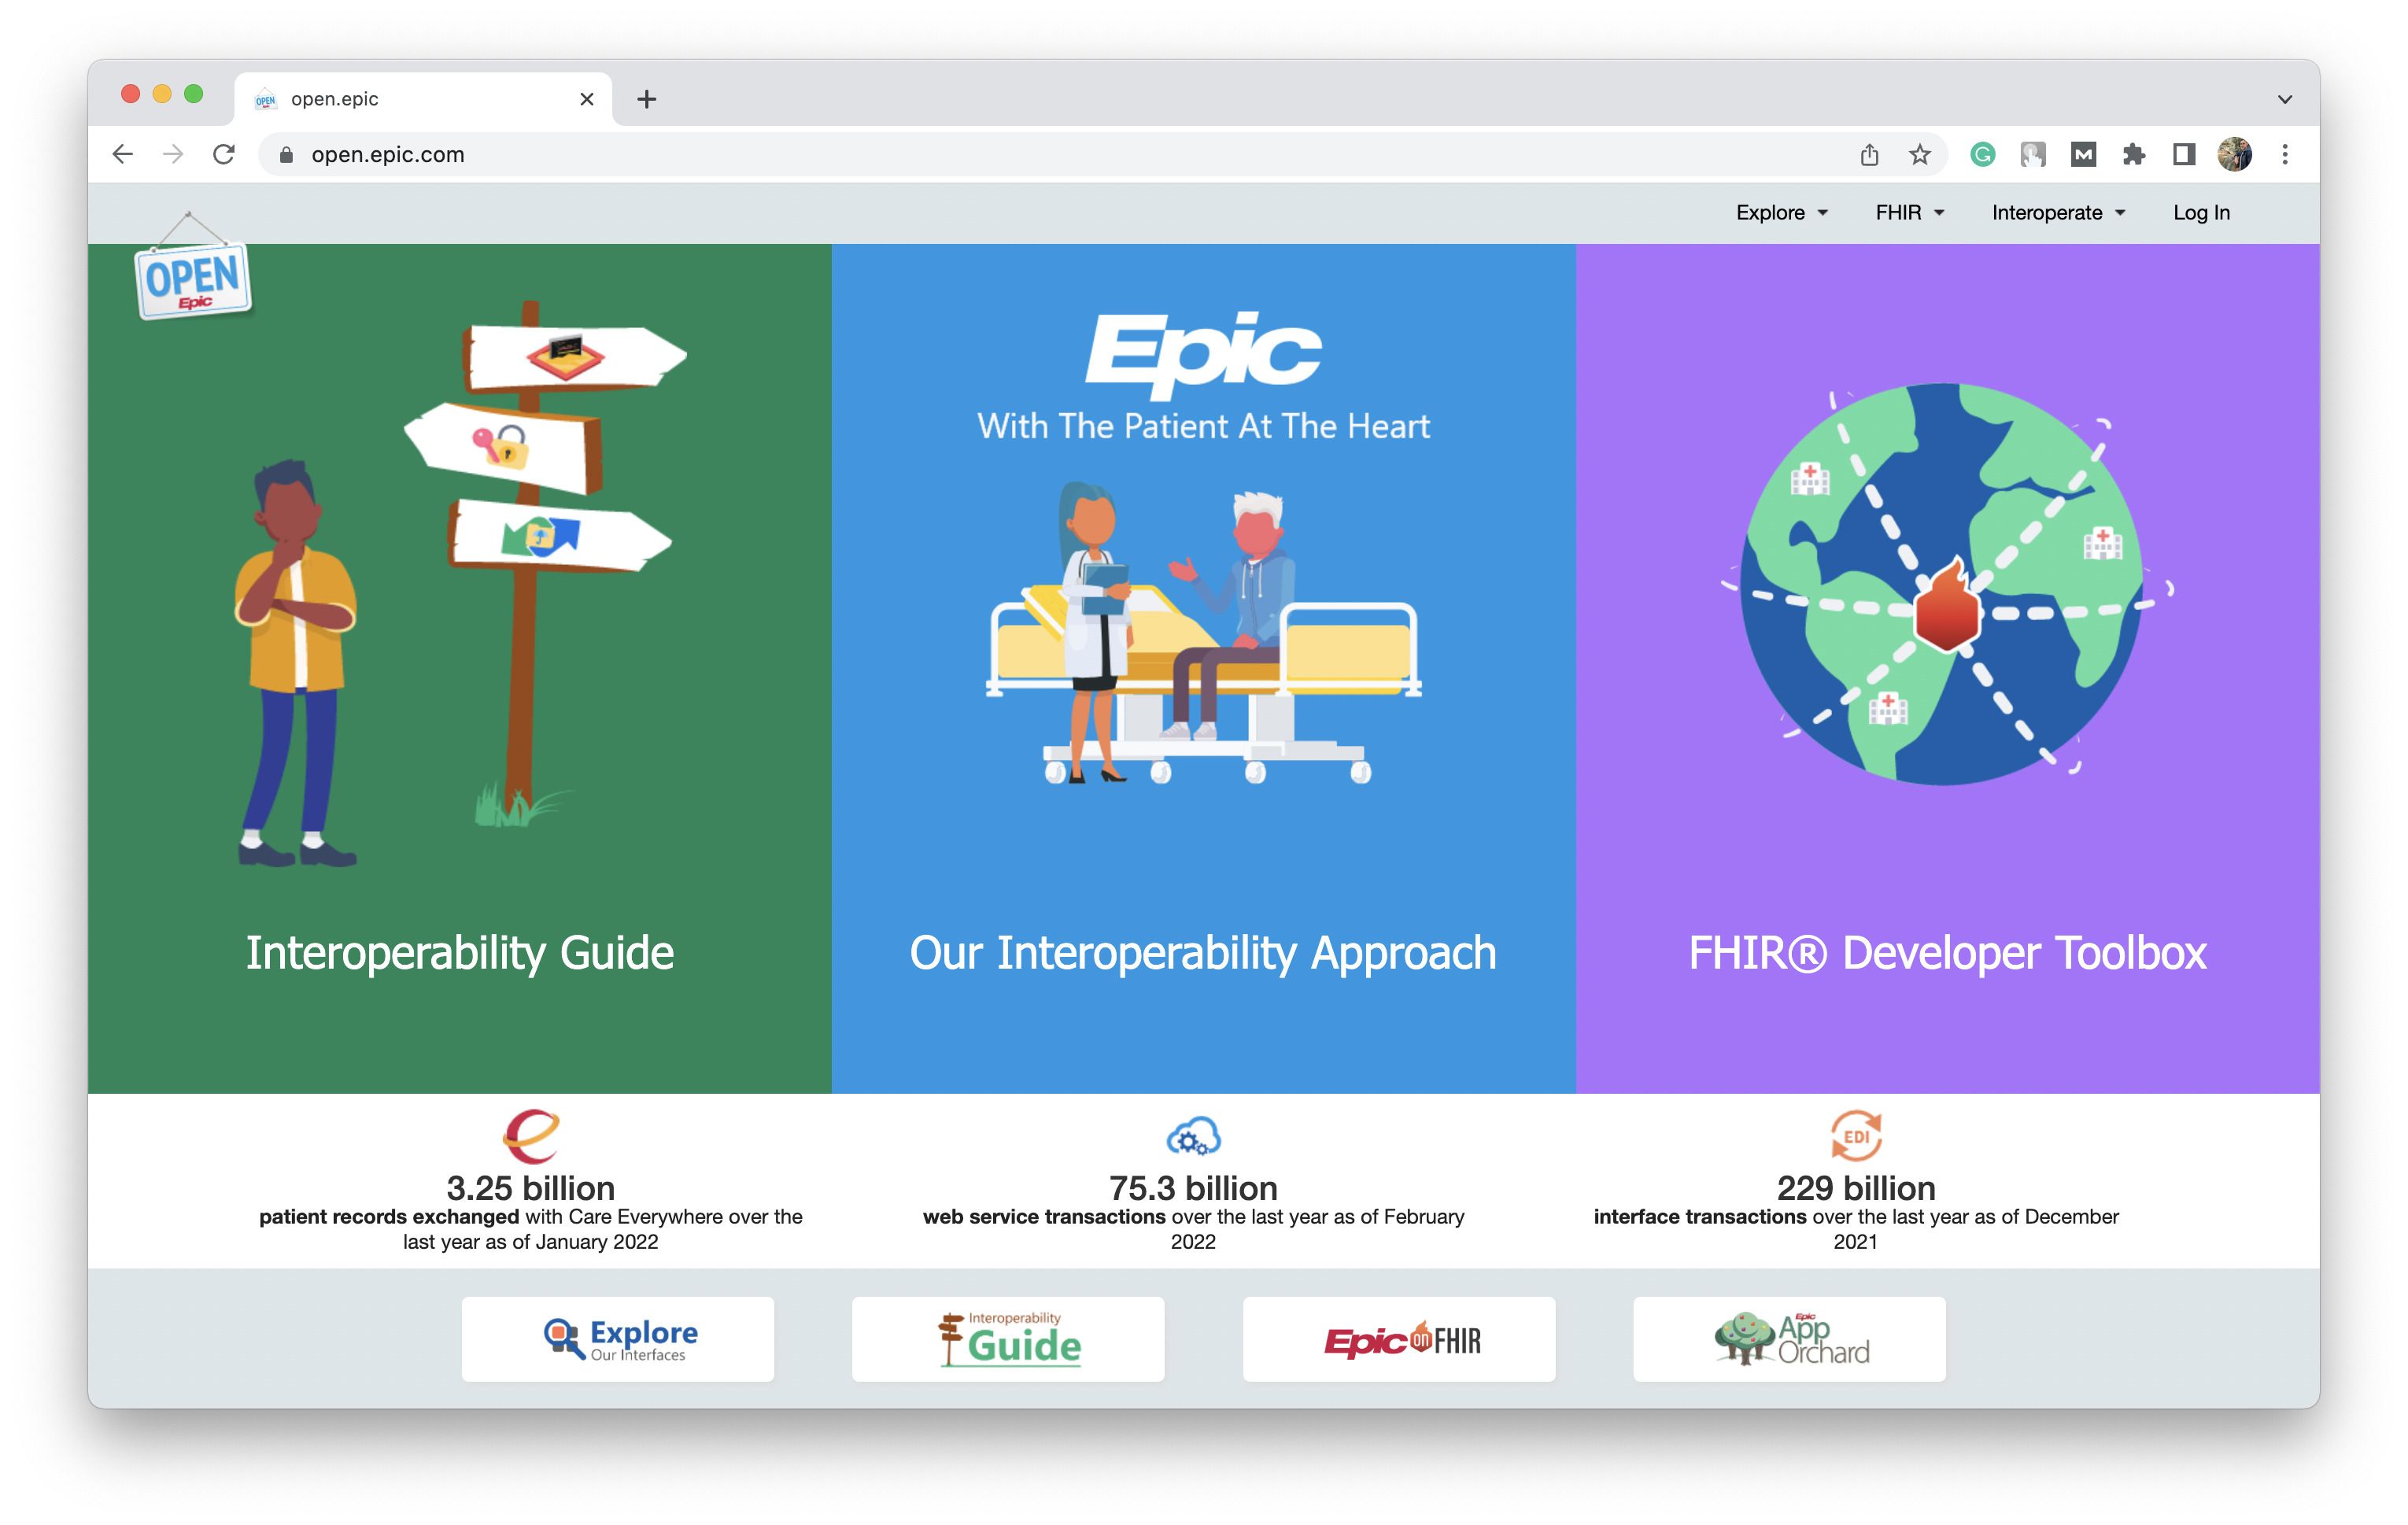 Integrating Epic Software allows clinical systems to access data and medication status of patients within the Epic System (*Screenshot from [Open Epic API](https://open.epic.com/){ rel="nofollow" target="_blank" .default-md}*)